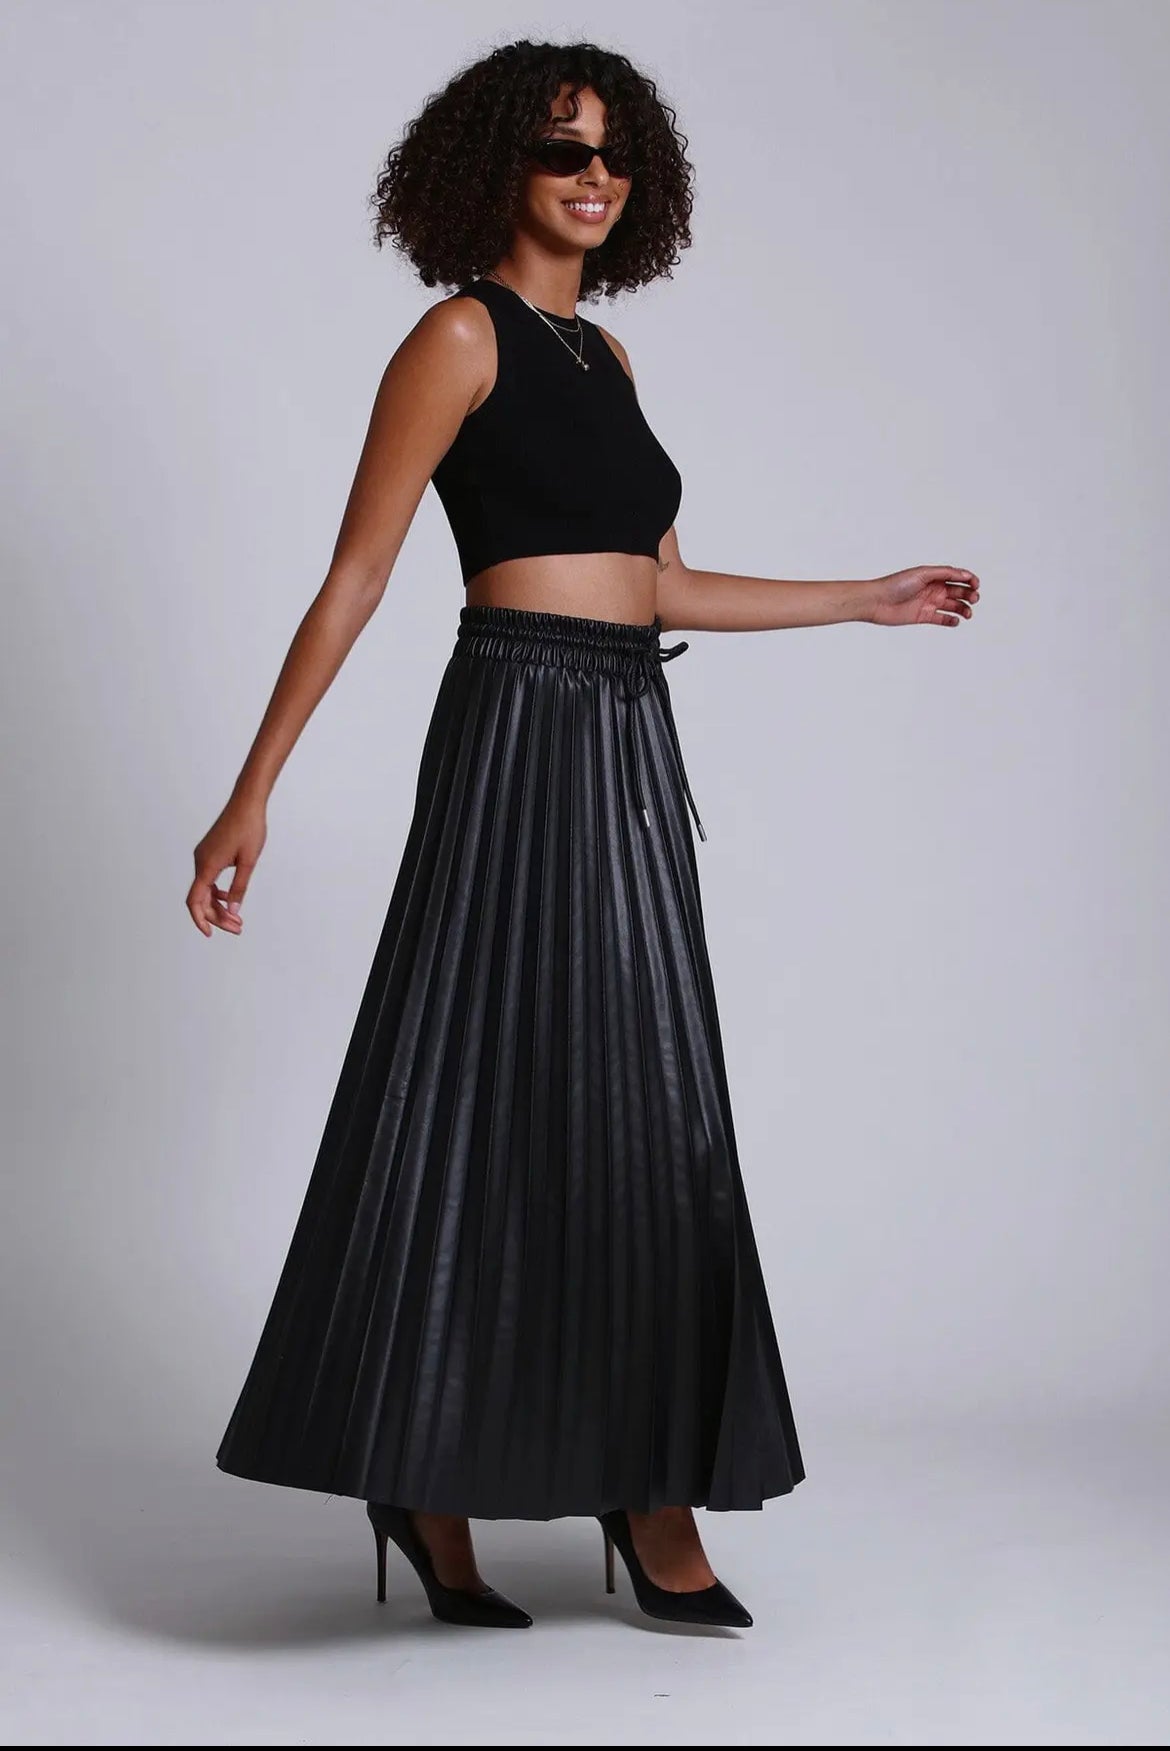 Faux-Ever Leather Pleated
Maxi Skirt